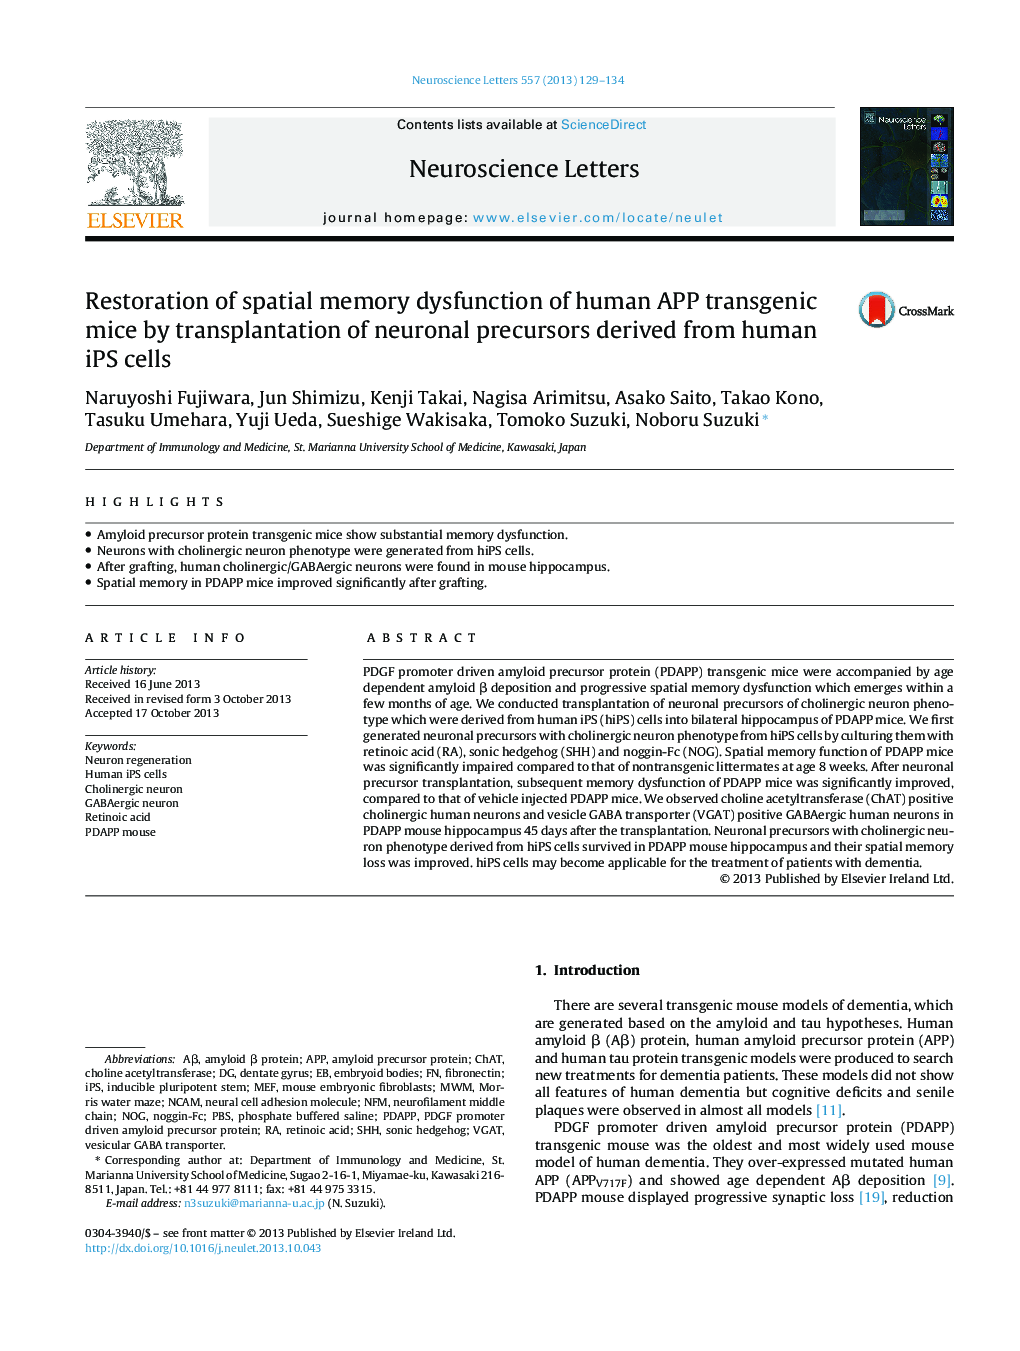 Restoration of spatial memory dysfunction of human APP transgenic mice by transplantation of neuronal precursors derived from human iPS cells